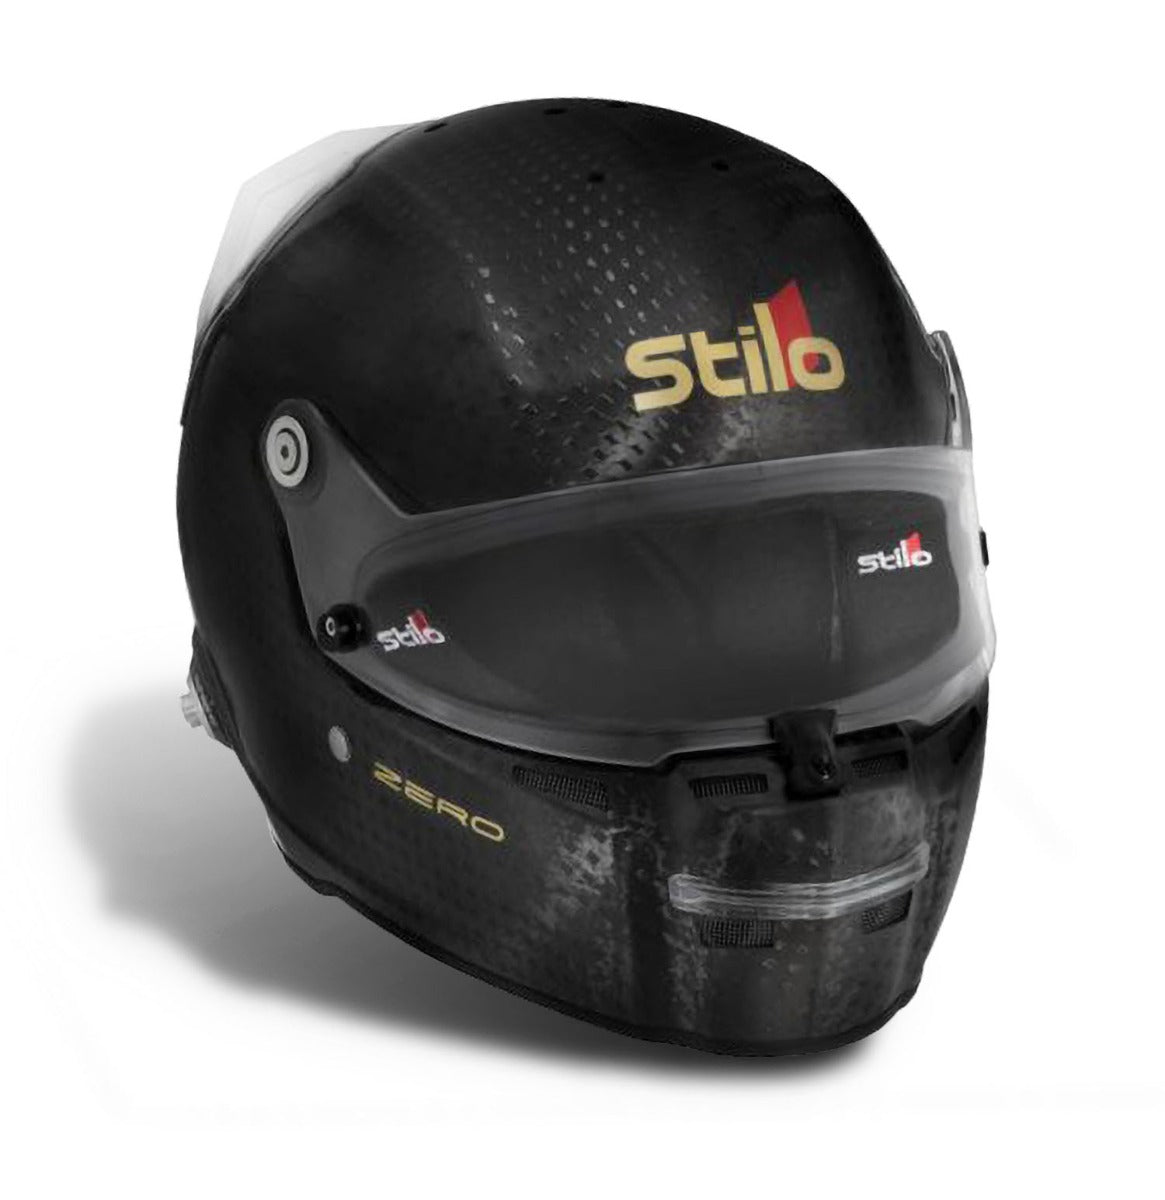 STILO ST5 FN ABP ZERO CARBON FIBER AUTO RACING HELMET IN STOCK AT THE LOWEST PRICES AND LARGEST DISCOUNTS FOR THE BEST DEAL ON STILO ST5 FN ABP ZERO CARBON FIBER AUTO RACING HELMET RIGHT PROFILE IMAGE